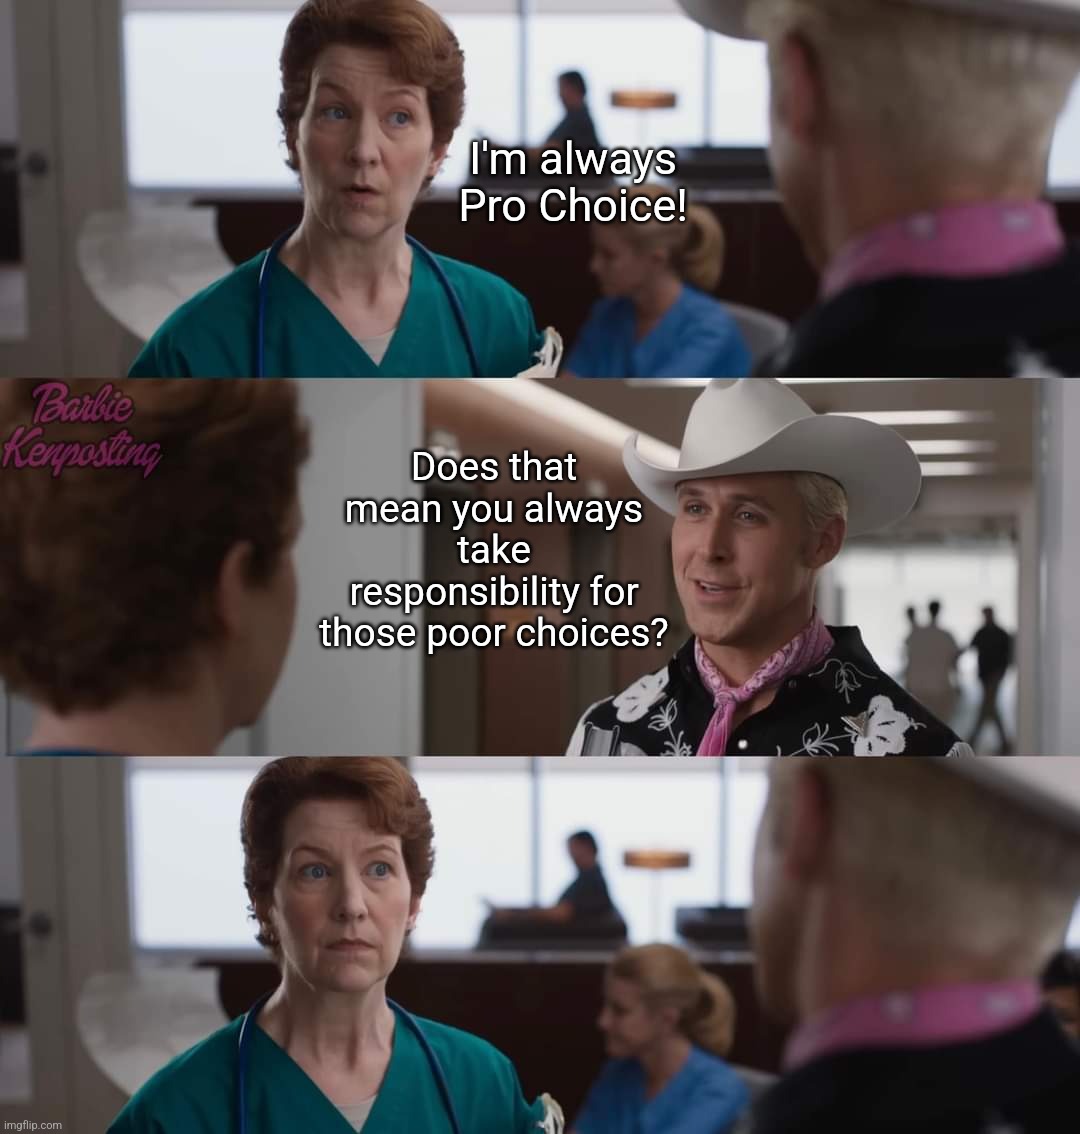 I'm always Pro Choice! Does that mean you always take responsibility for those poor choices? | image tagged in pro choice | made w/ Imgflip meme maker